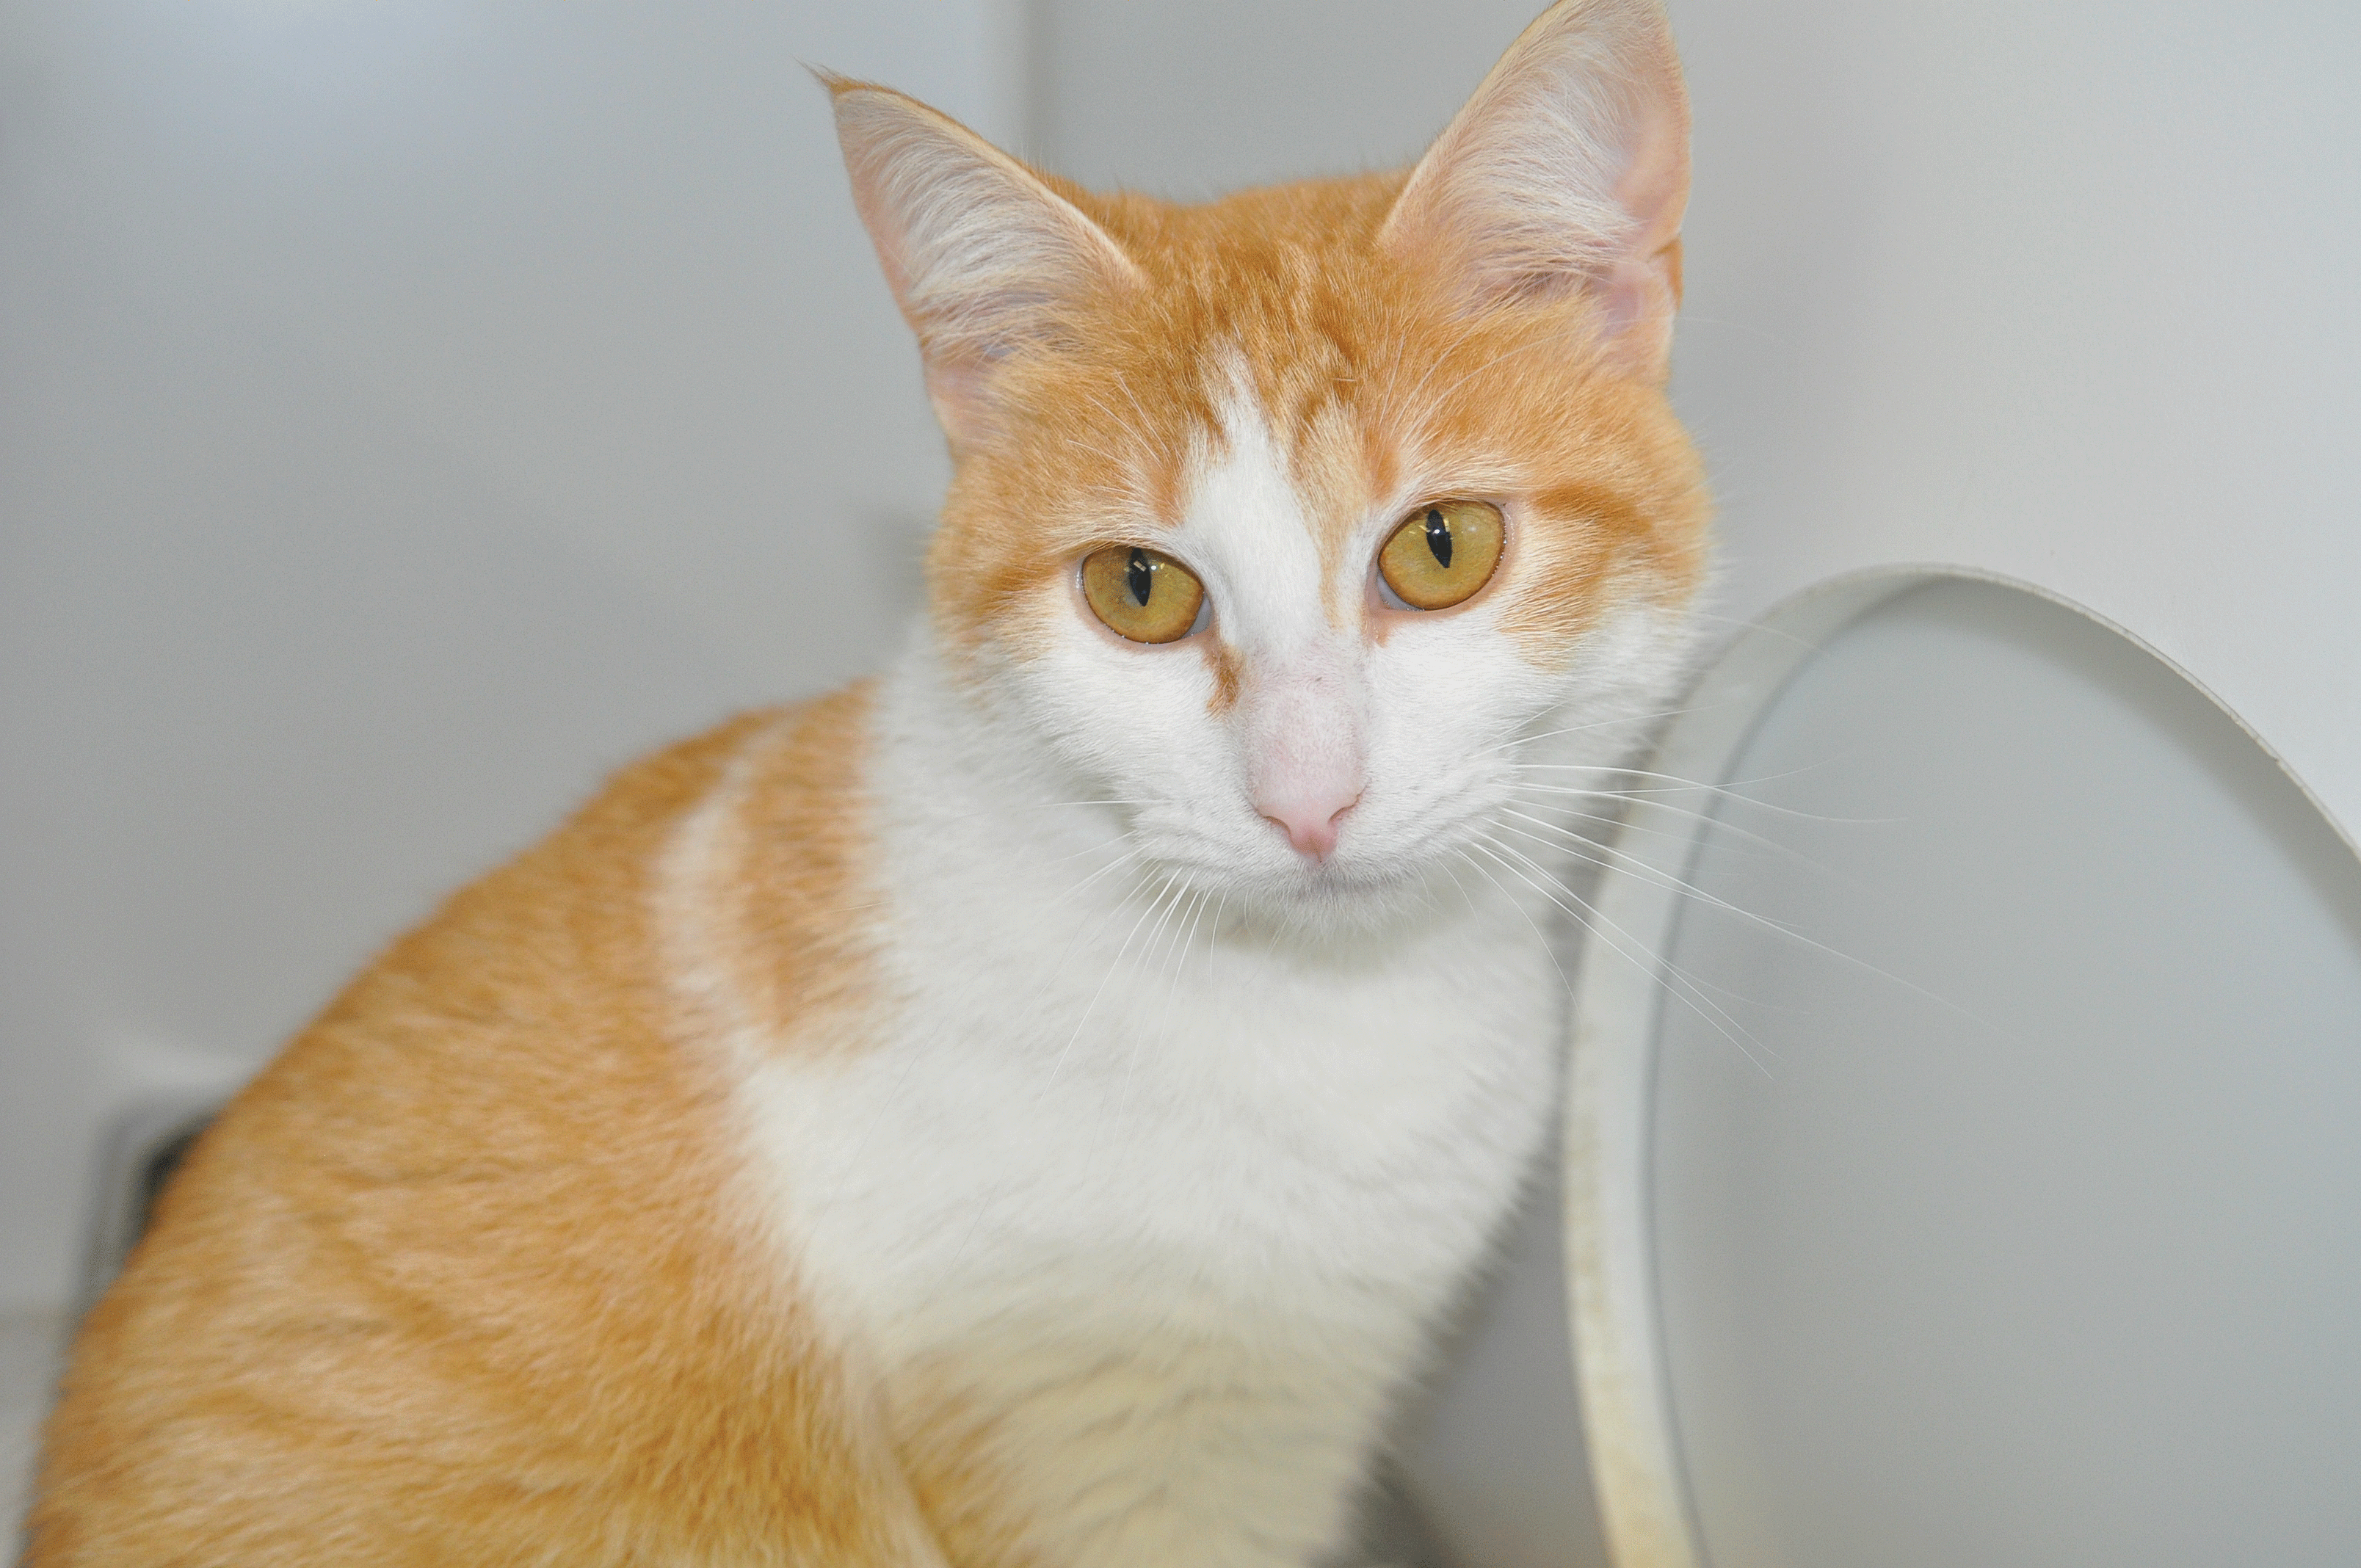 Orange, white cat looking for a home - Valley Morning Star : Local News